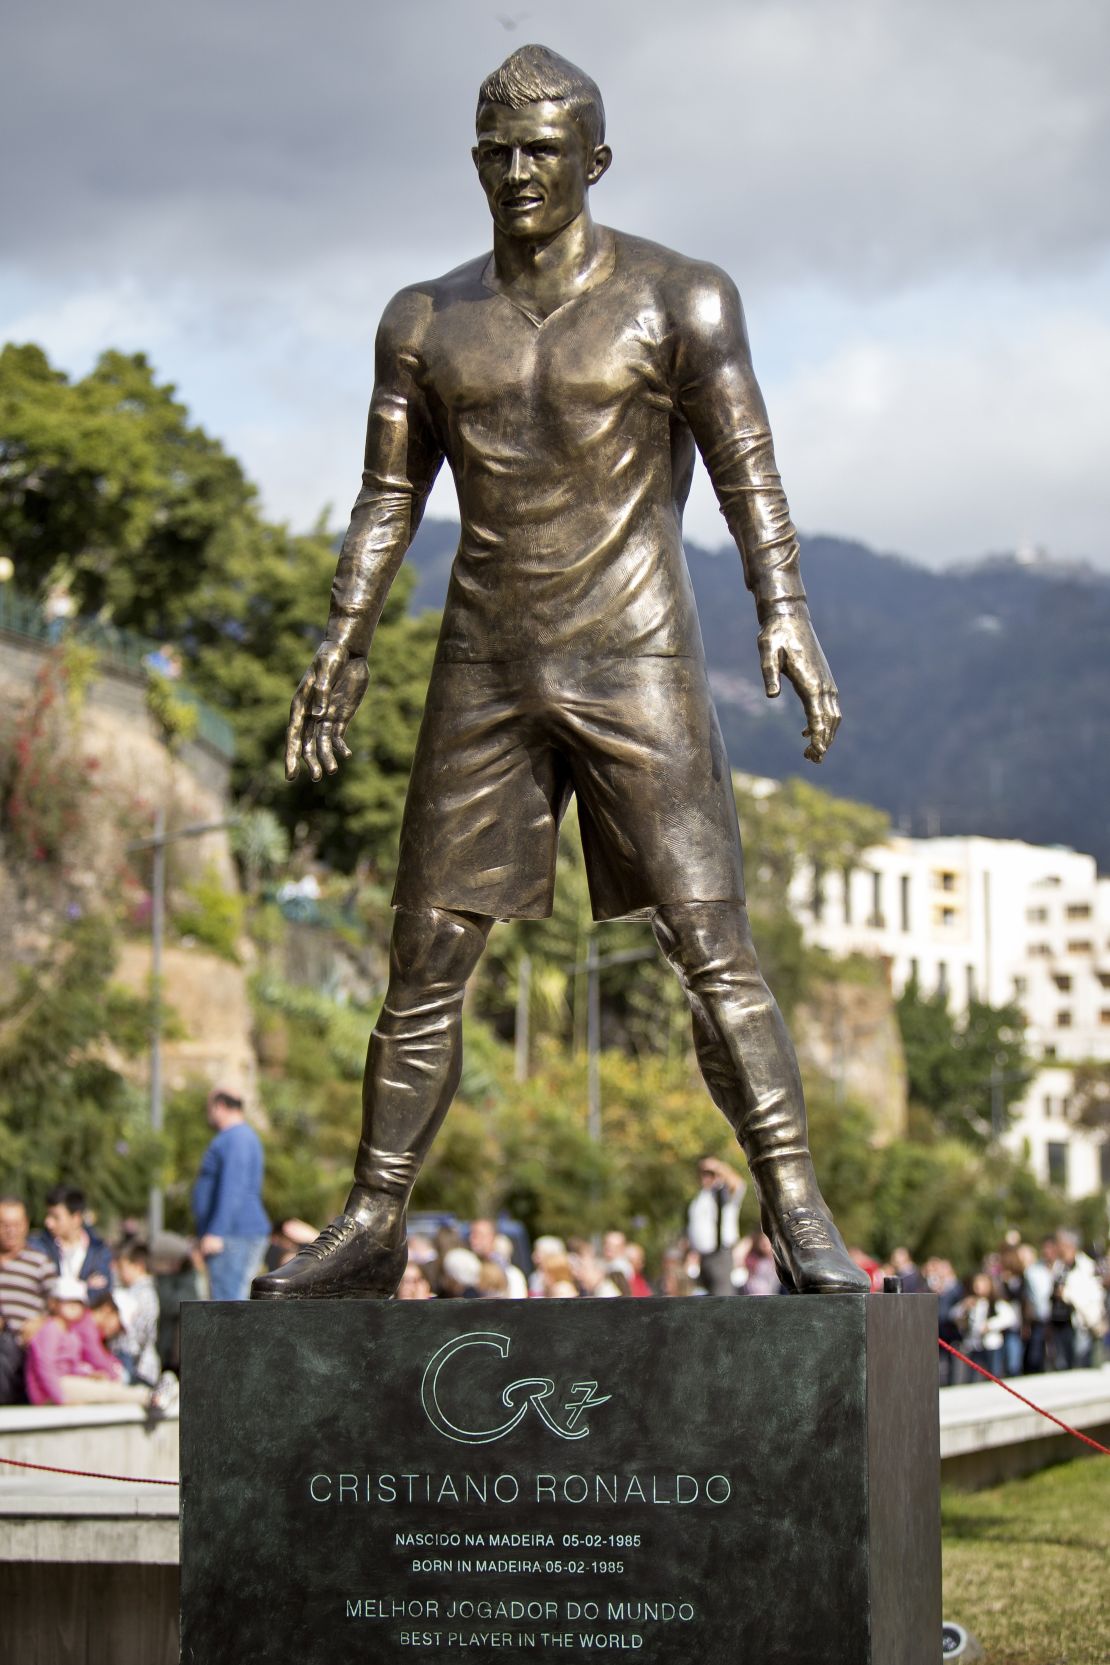 A 10ft statue of Ronaldo was unveiled in Madeira in 2014